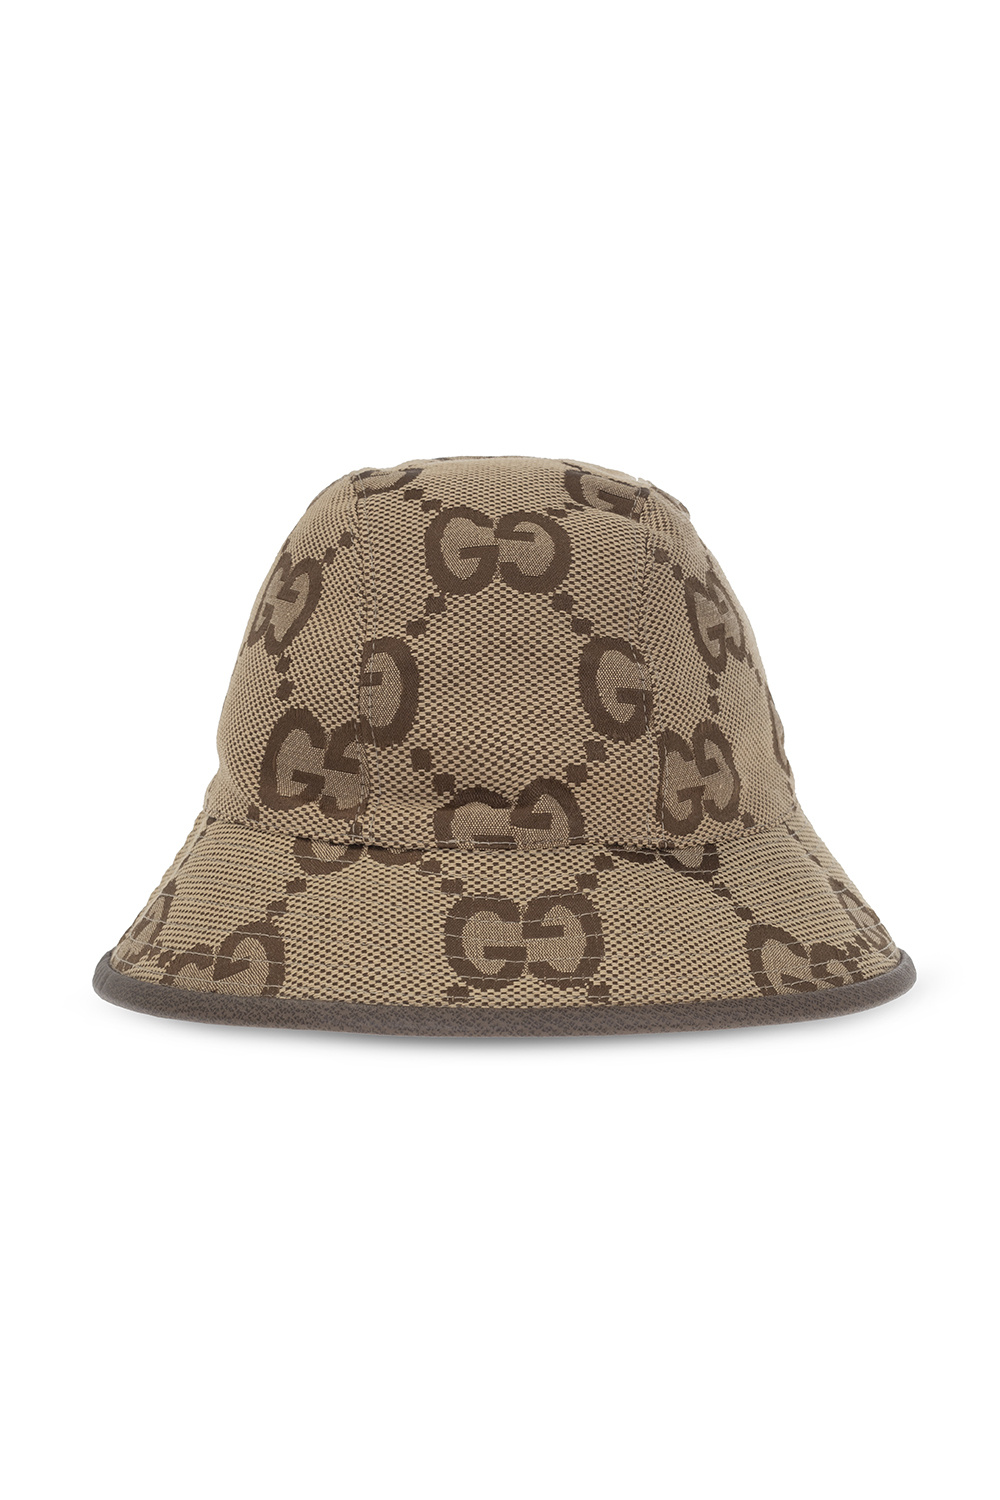 Gucci Canvas Bucket Hat With Horsebit Black Gucci Hat in 2023